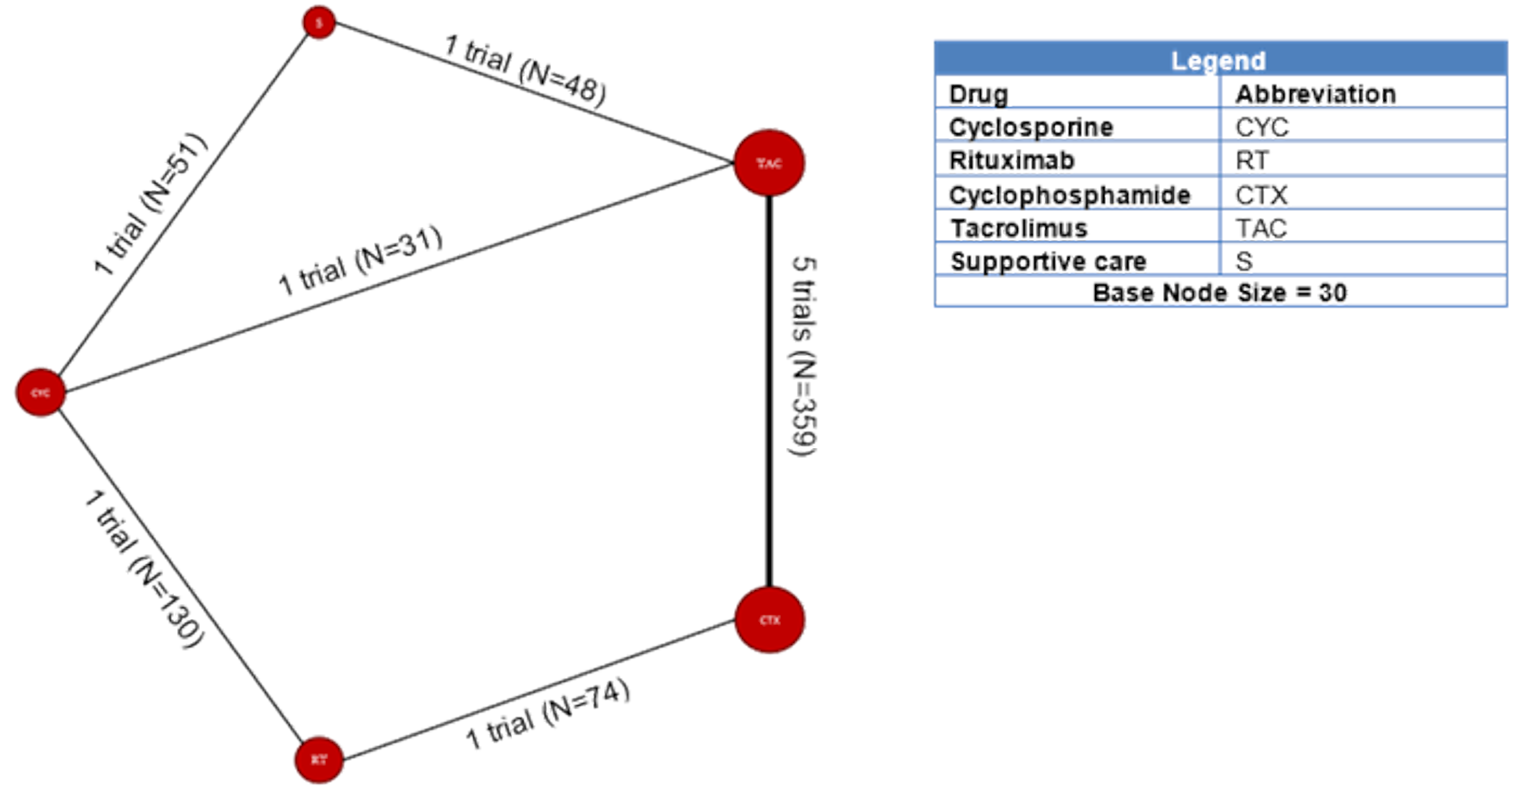 This figure shows the network meta-analysis for complete remission at 6 months.